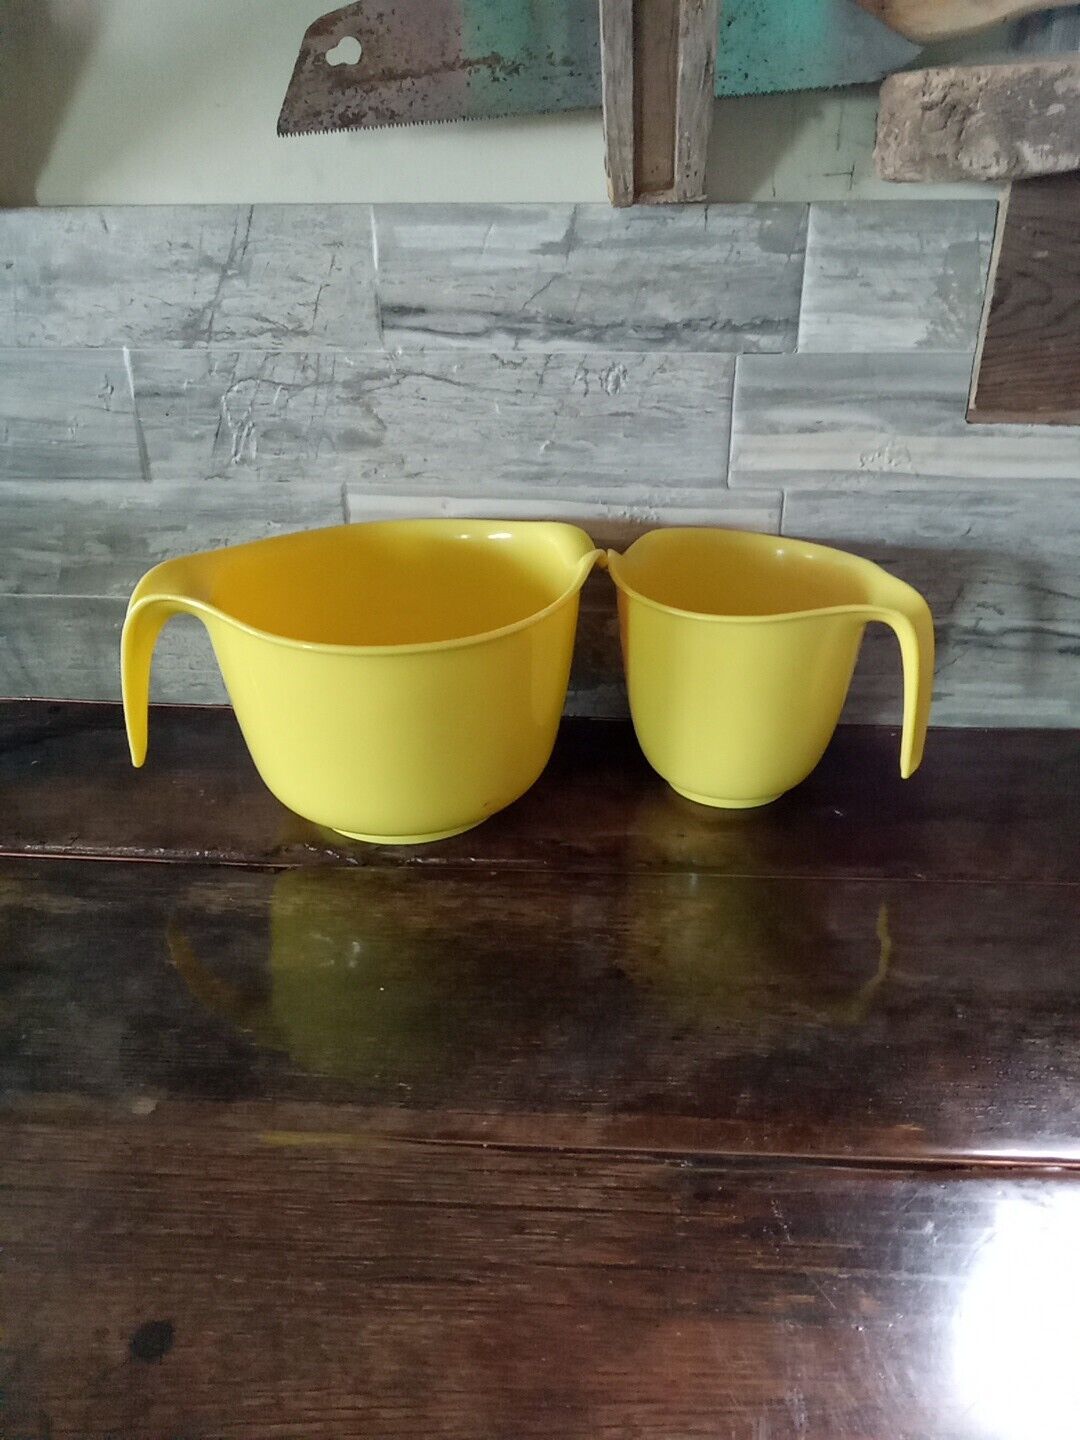 2 Vtg Rubbermaid 6 & 12 Cup Batter Bowl Grip & Mix Measuring Yellow Mixing